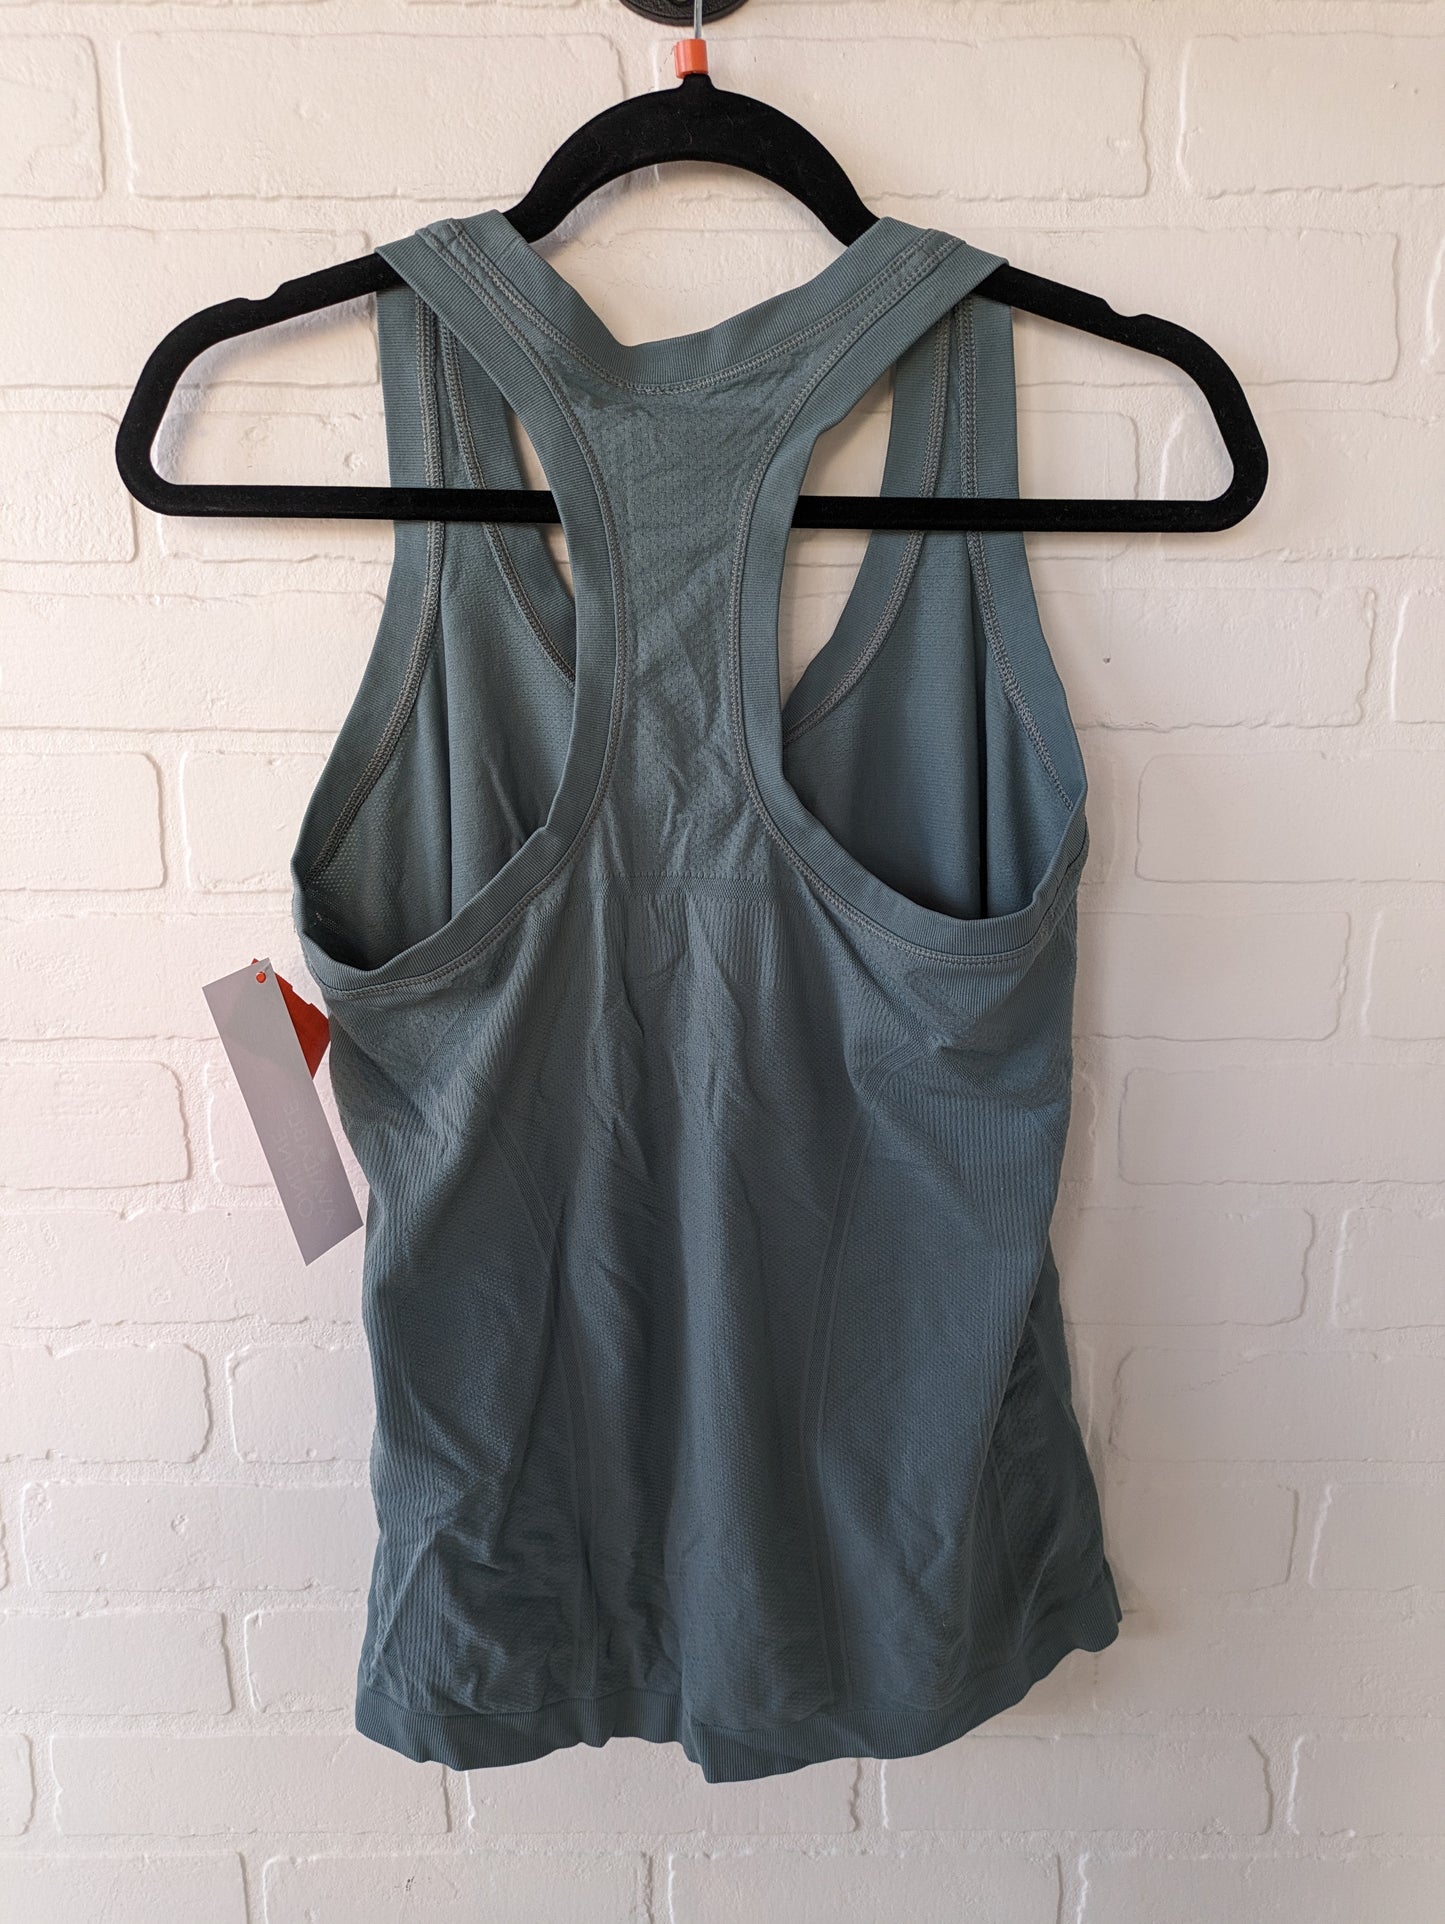 Athletic Tank Top By Athleta  Size: L